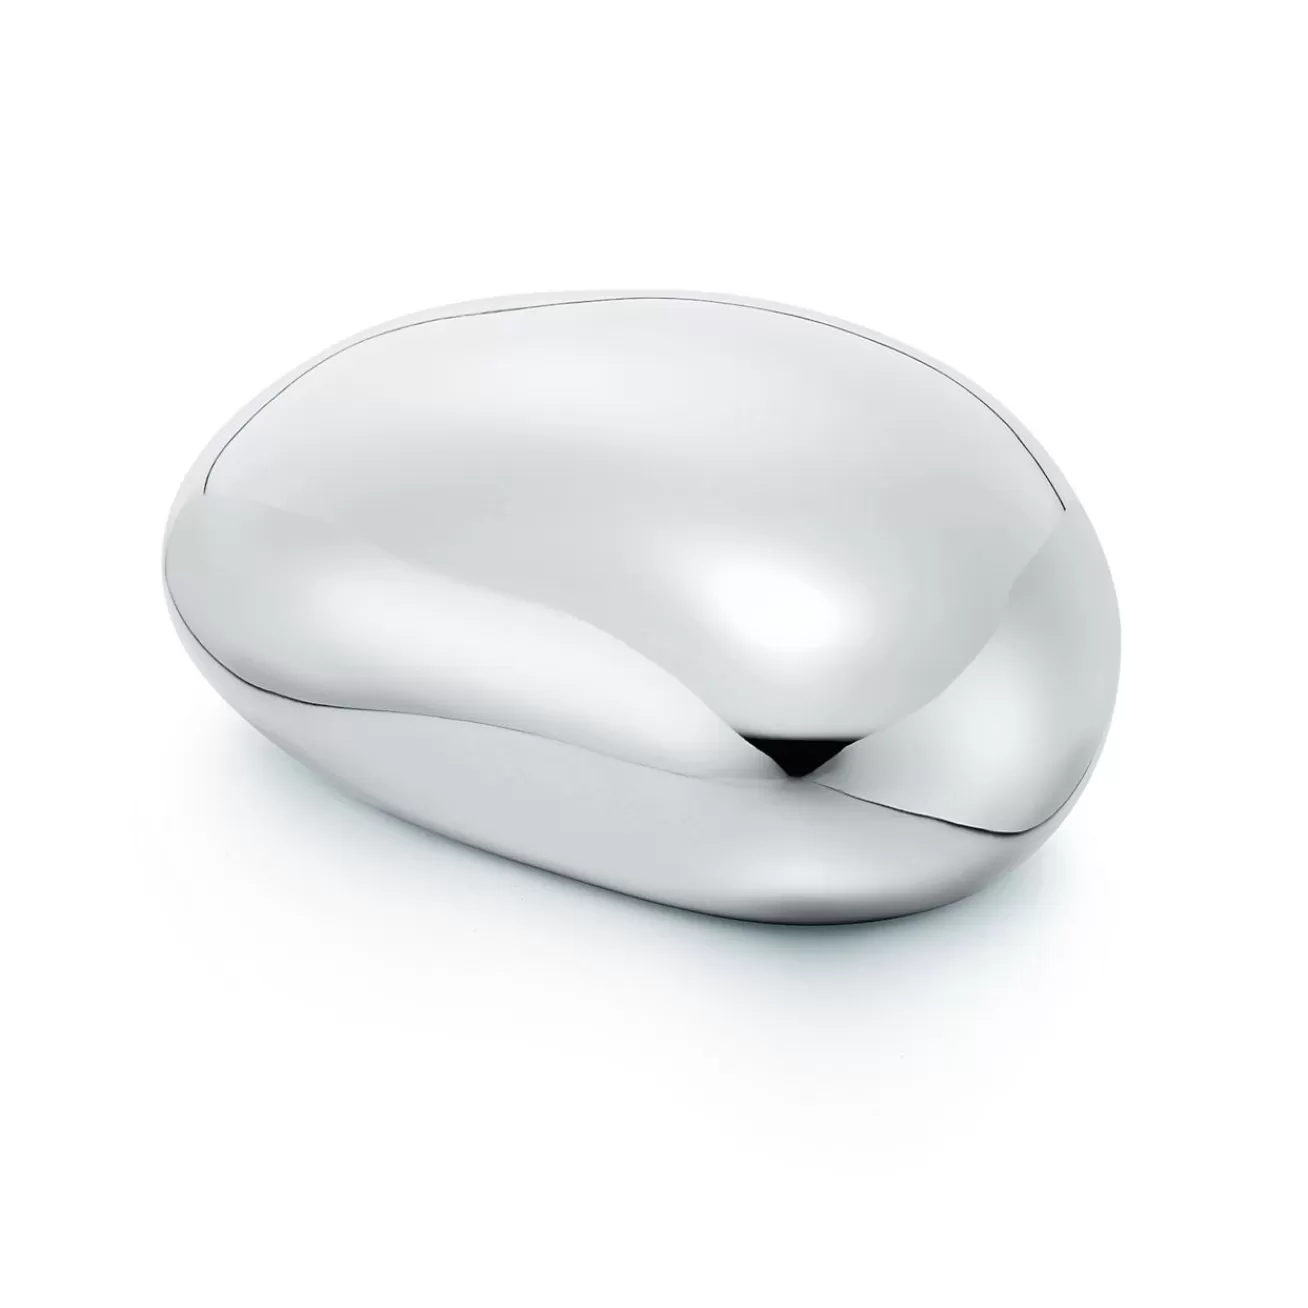 Tiffany & Co. Elsa Peretti® Stone paperweight in sterling silver. | ^ Business Gifts | Stationery, Games & Unique Objects